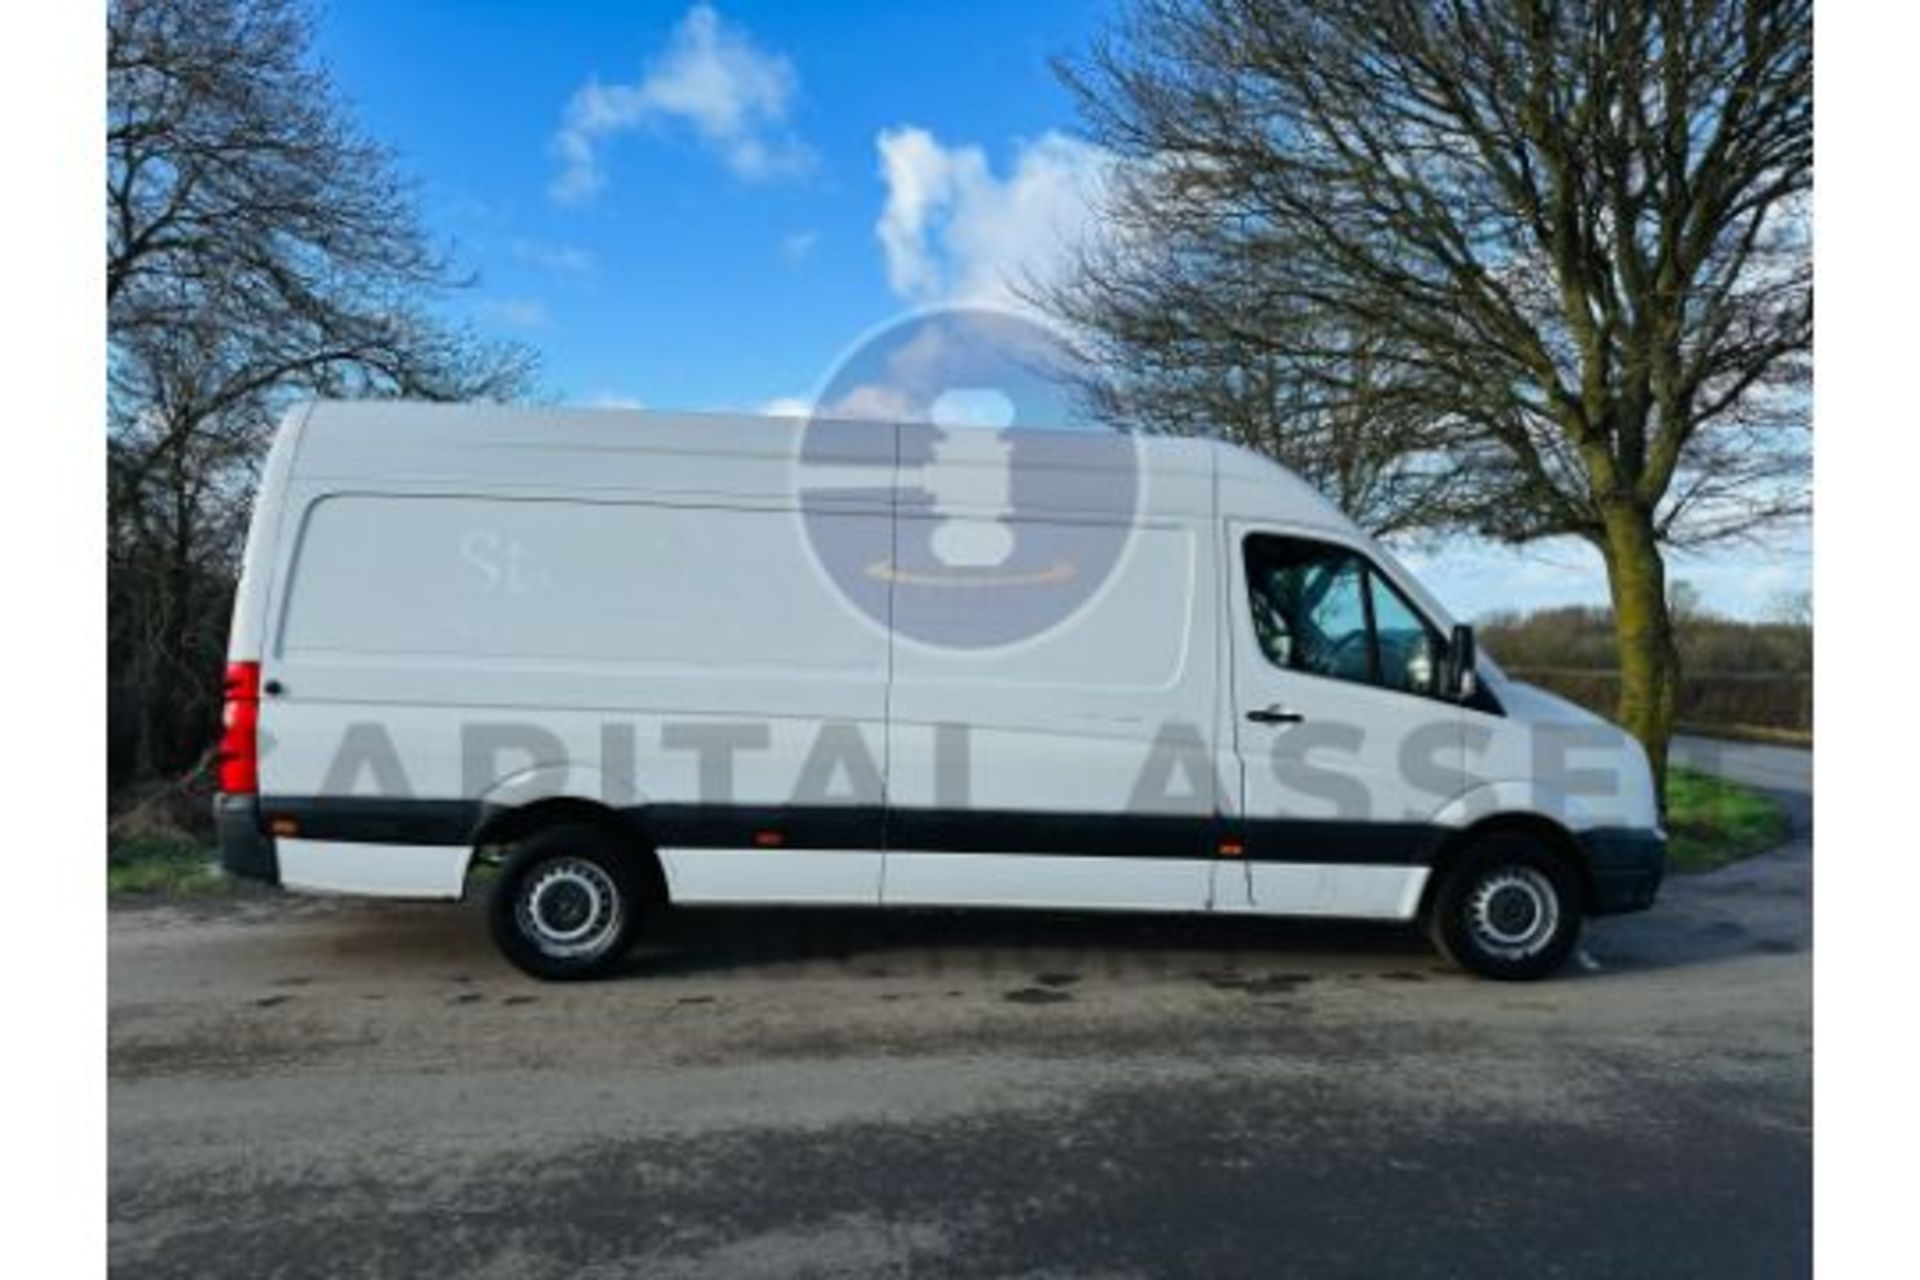 (ON SALE) VOLKSWAGEN CRAFTER 2.0TDI (140) LONG WHEEL BASE - 2017 REG - EURO 6 - AIR CON - LOOK!! - Image 9 of 31